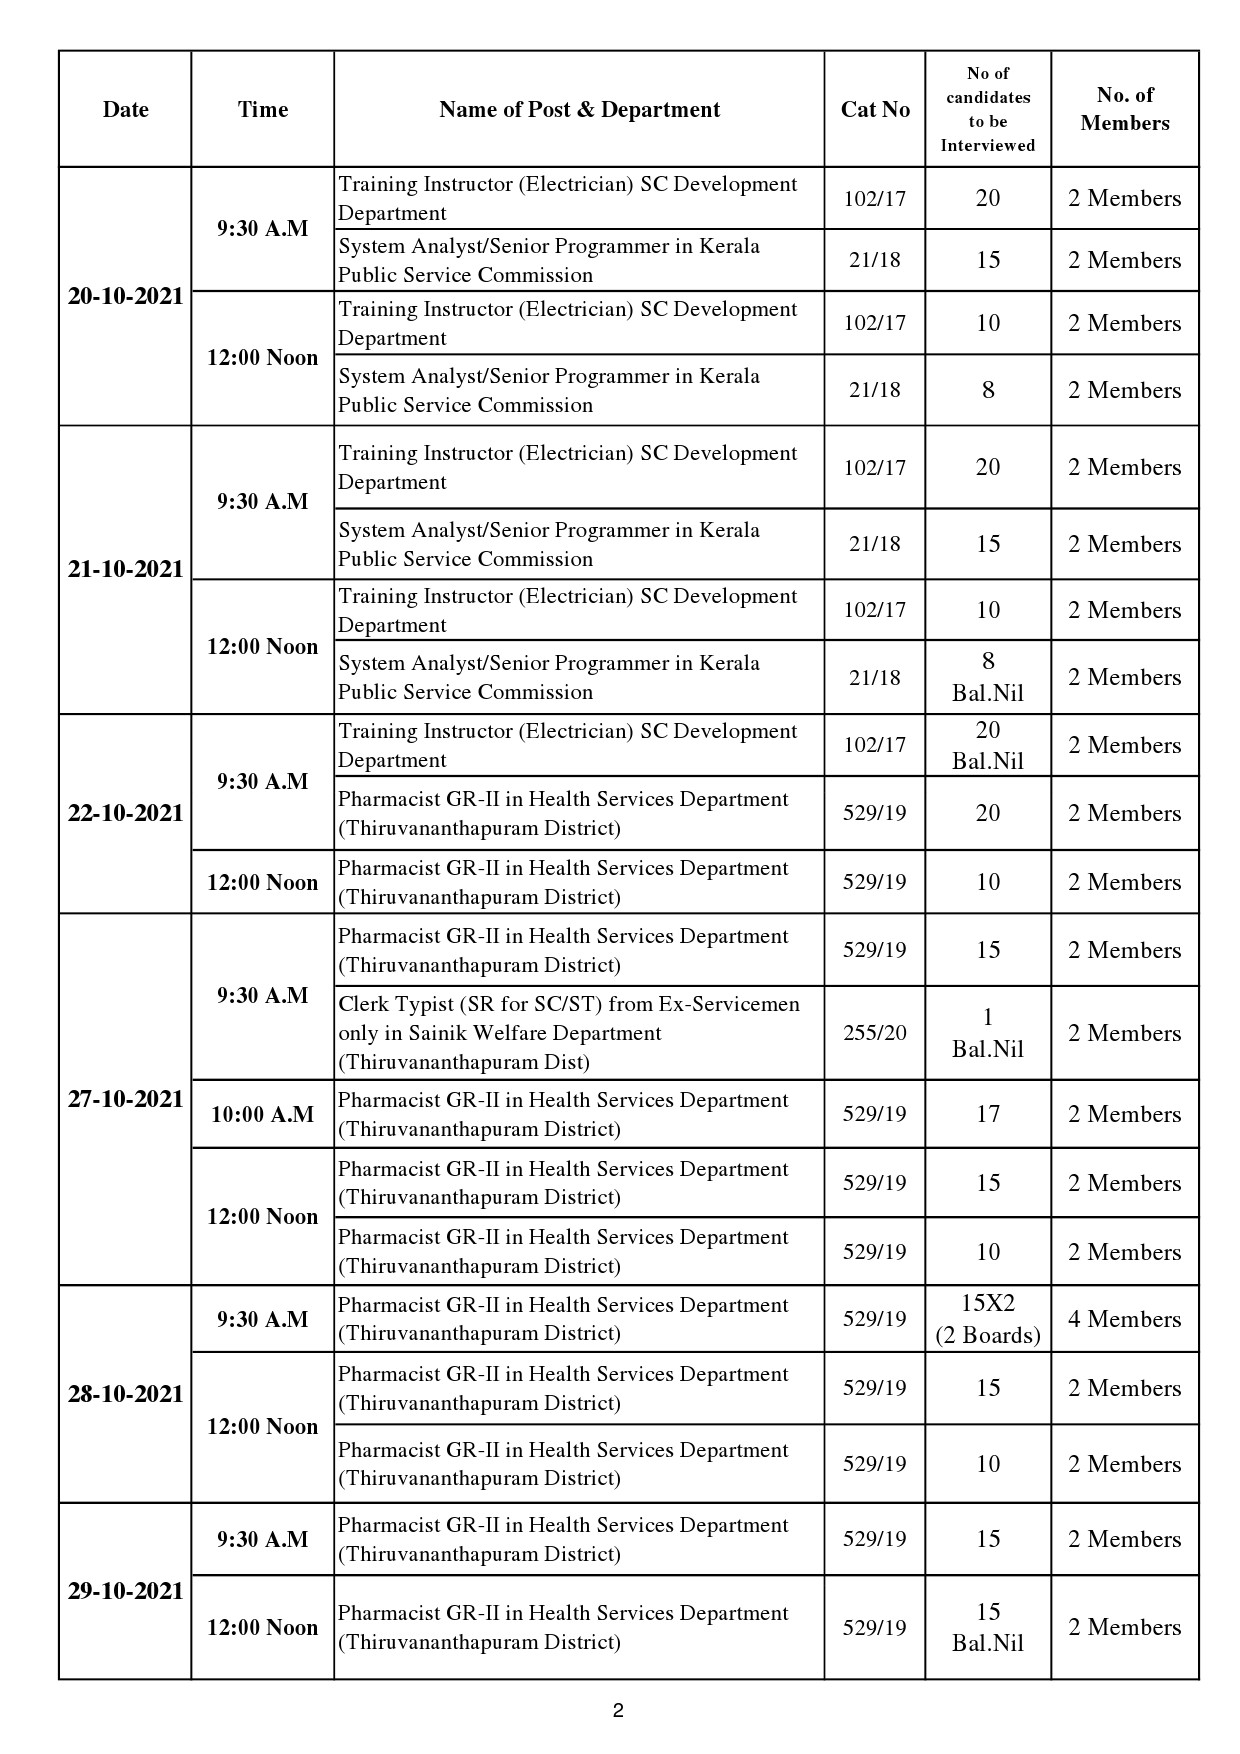 KPSC Interview Programme For The Month Of October 2021 - Notification Image 2